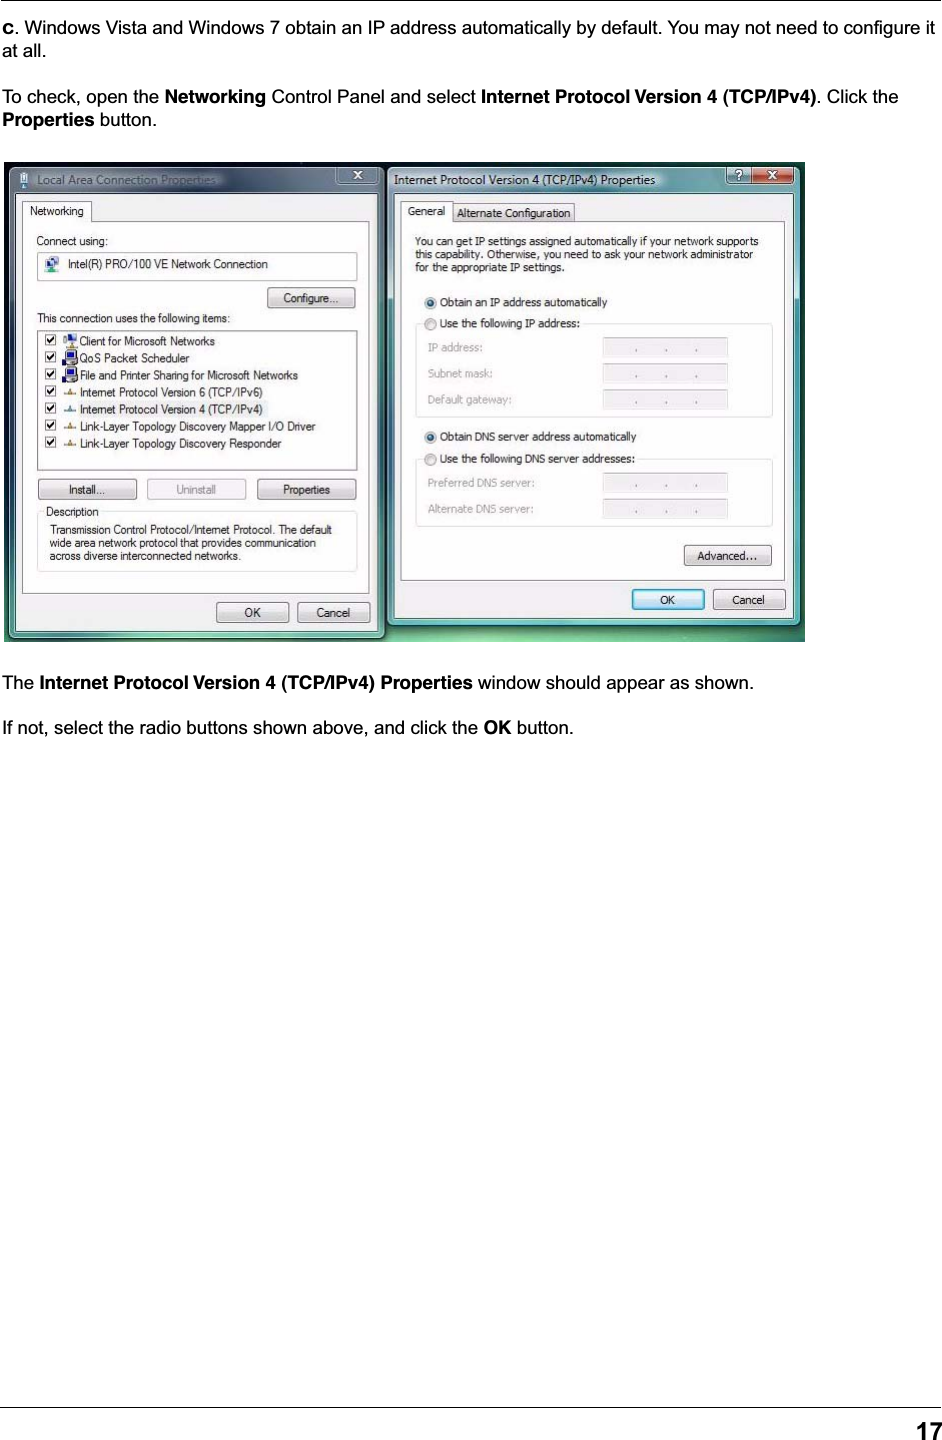 17c. Windows Vista and Windows 7 obtain an IP address automatically by default. You may not need to configure it at all.To check, open the Networking Control Panel and select Internet Protocol Version 4 (TCP/IPv4). Click the Properties button.The Internet Protocol Version 4 (TCP/IPv4) Properties window should appear as shown.If not, select the radio buttons shown above, and click the OK button.